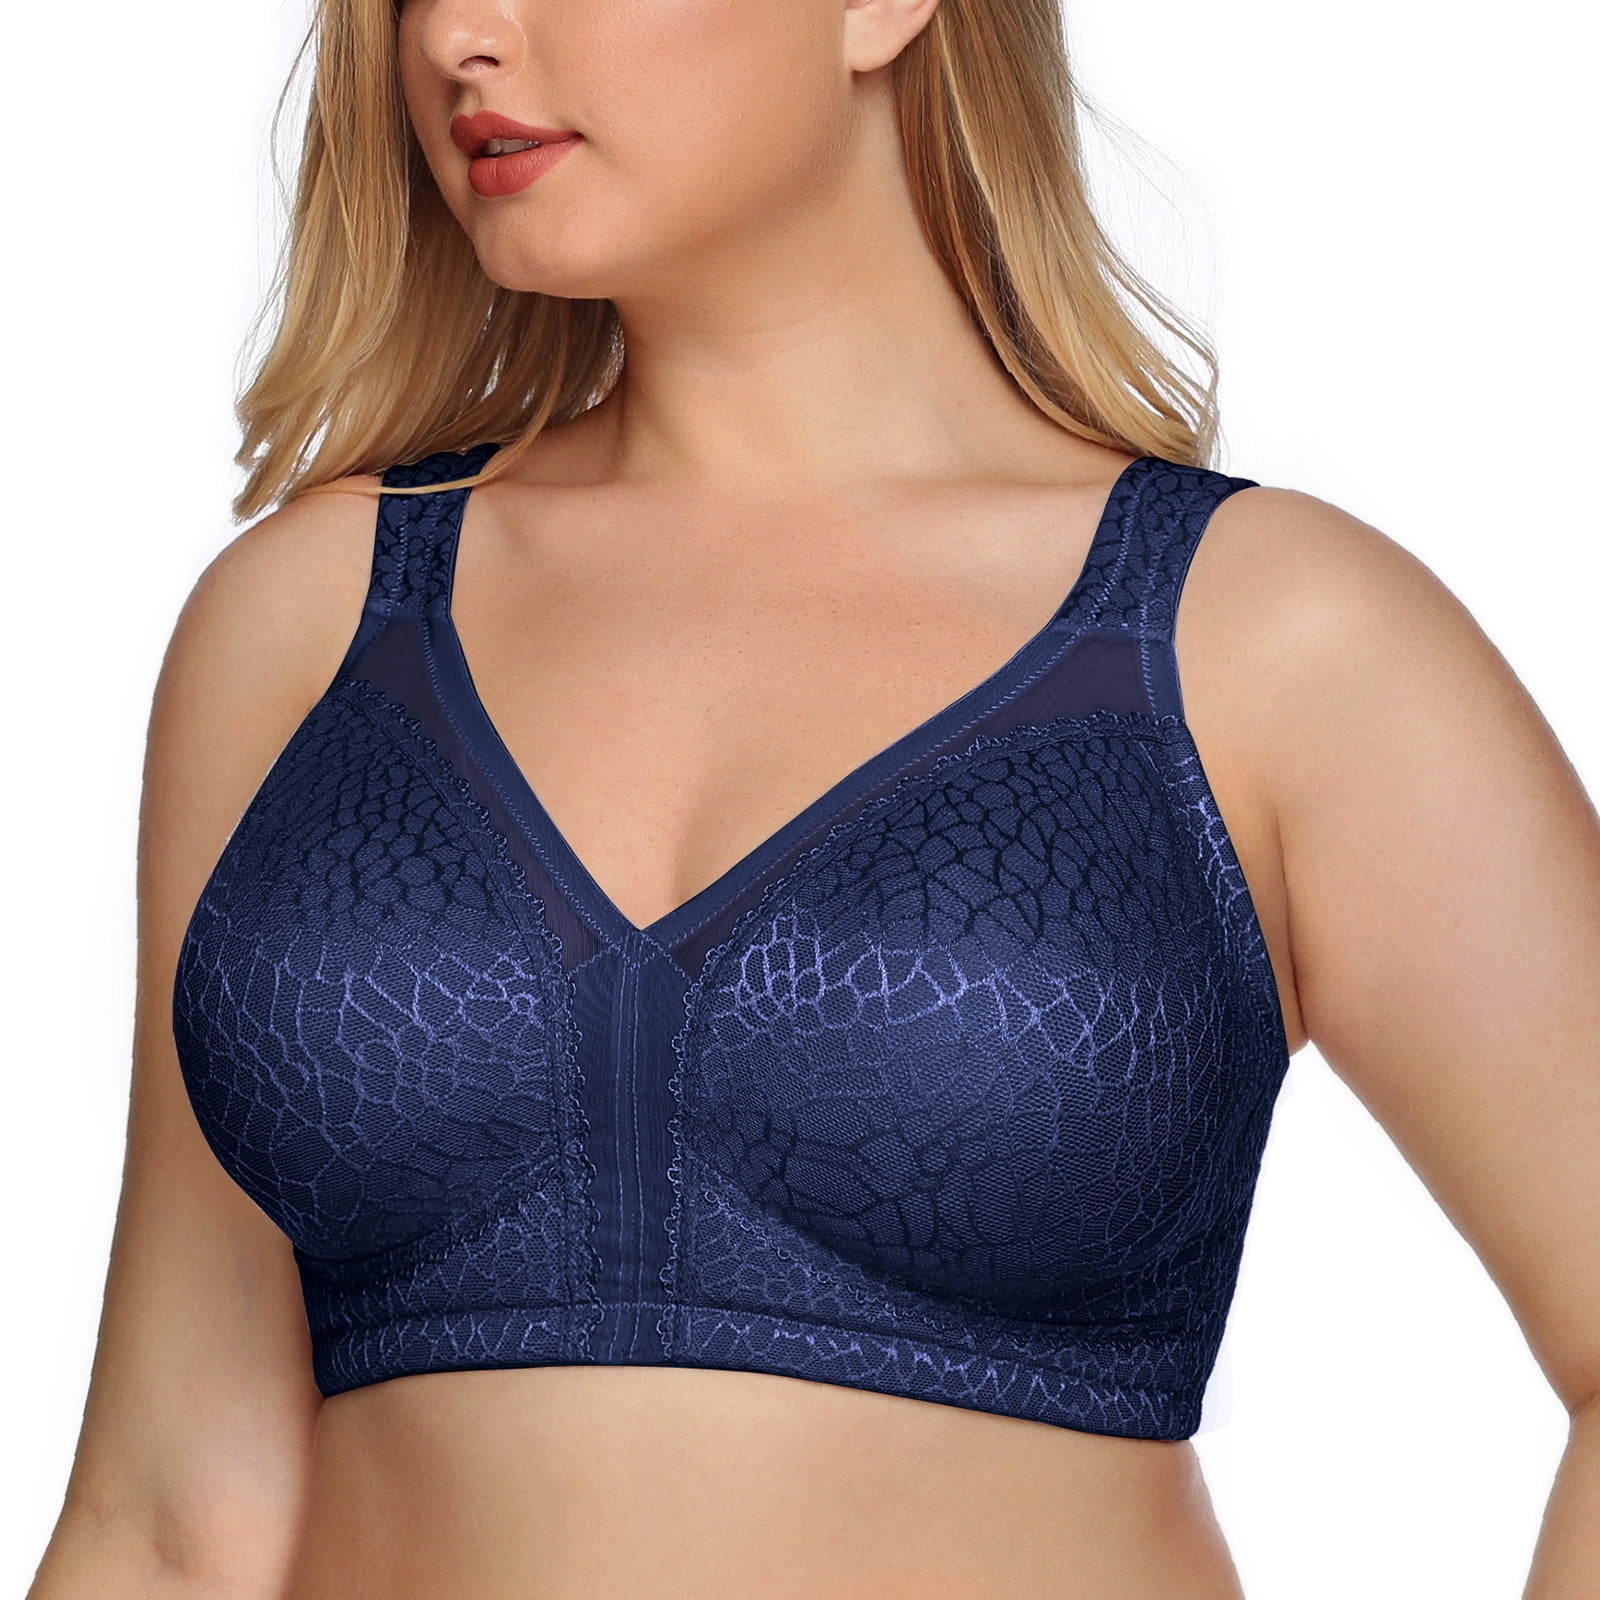 Newest Drop This Week: Minimizer Bras for Plus Size Besties